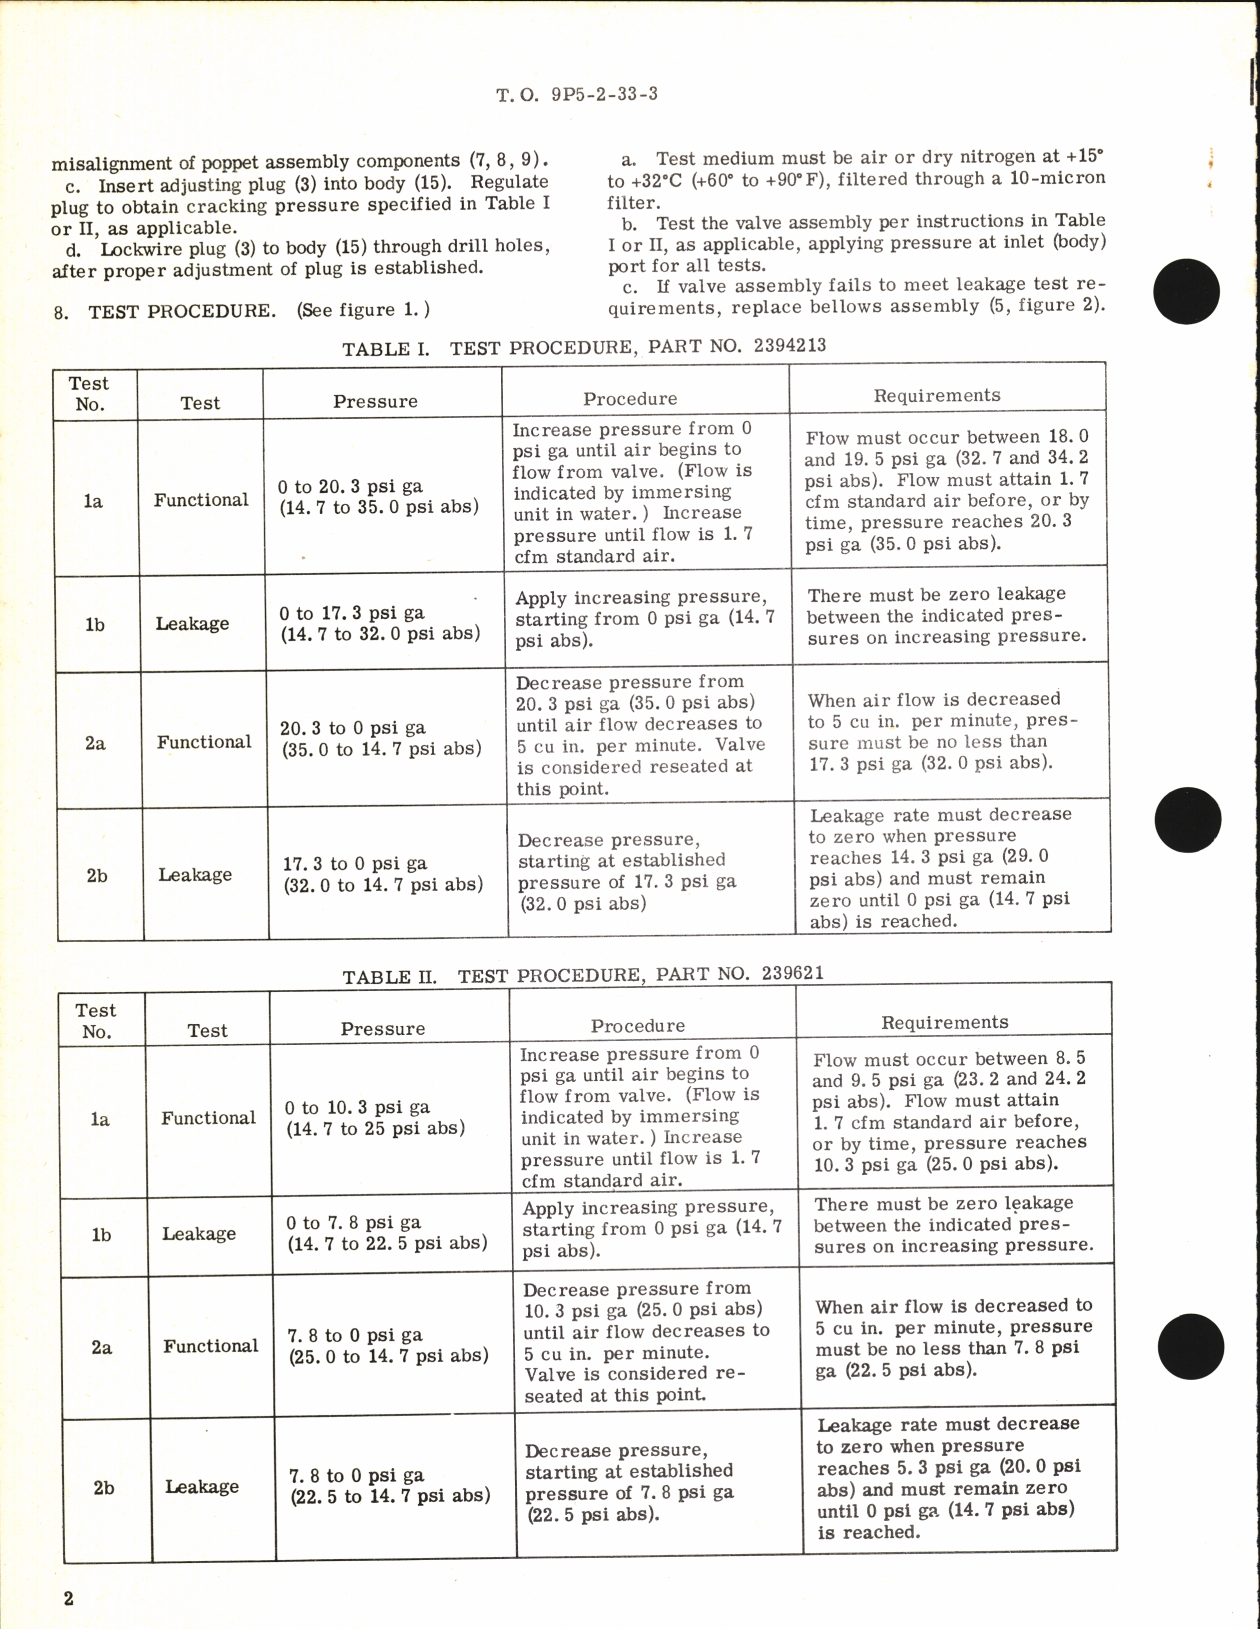 Sample page 2  from AirCorps Library document: Overhaul Instructions with Parts Breakdown for Low Pressure Pneumatic Relief Valves Part No. 2394213, 239621